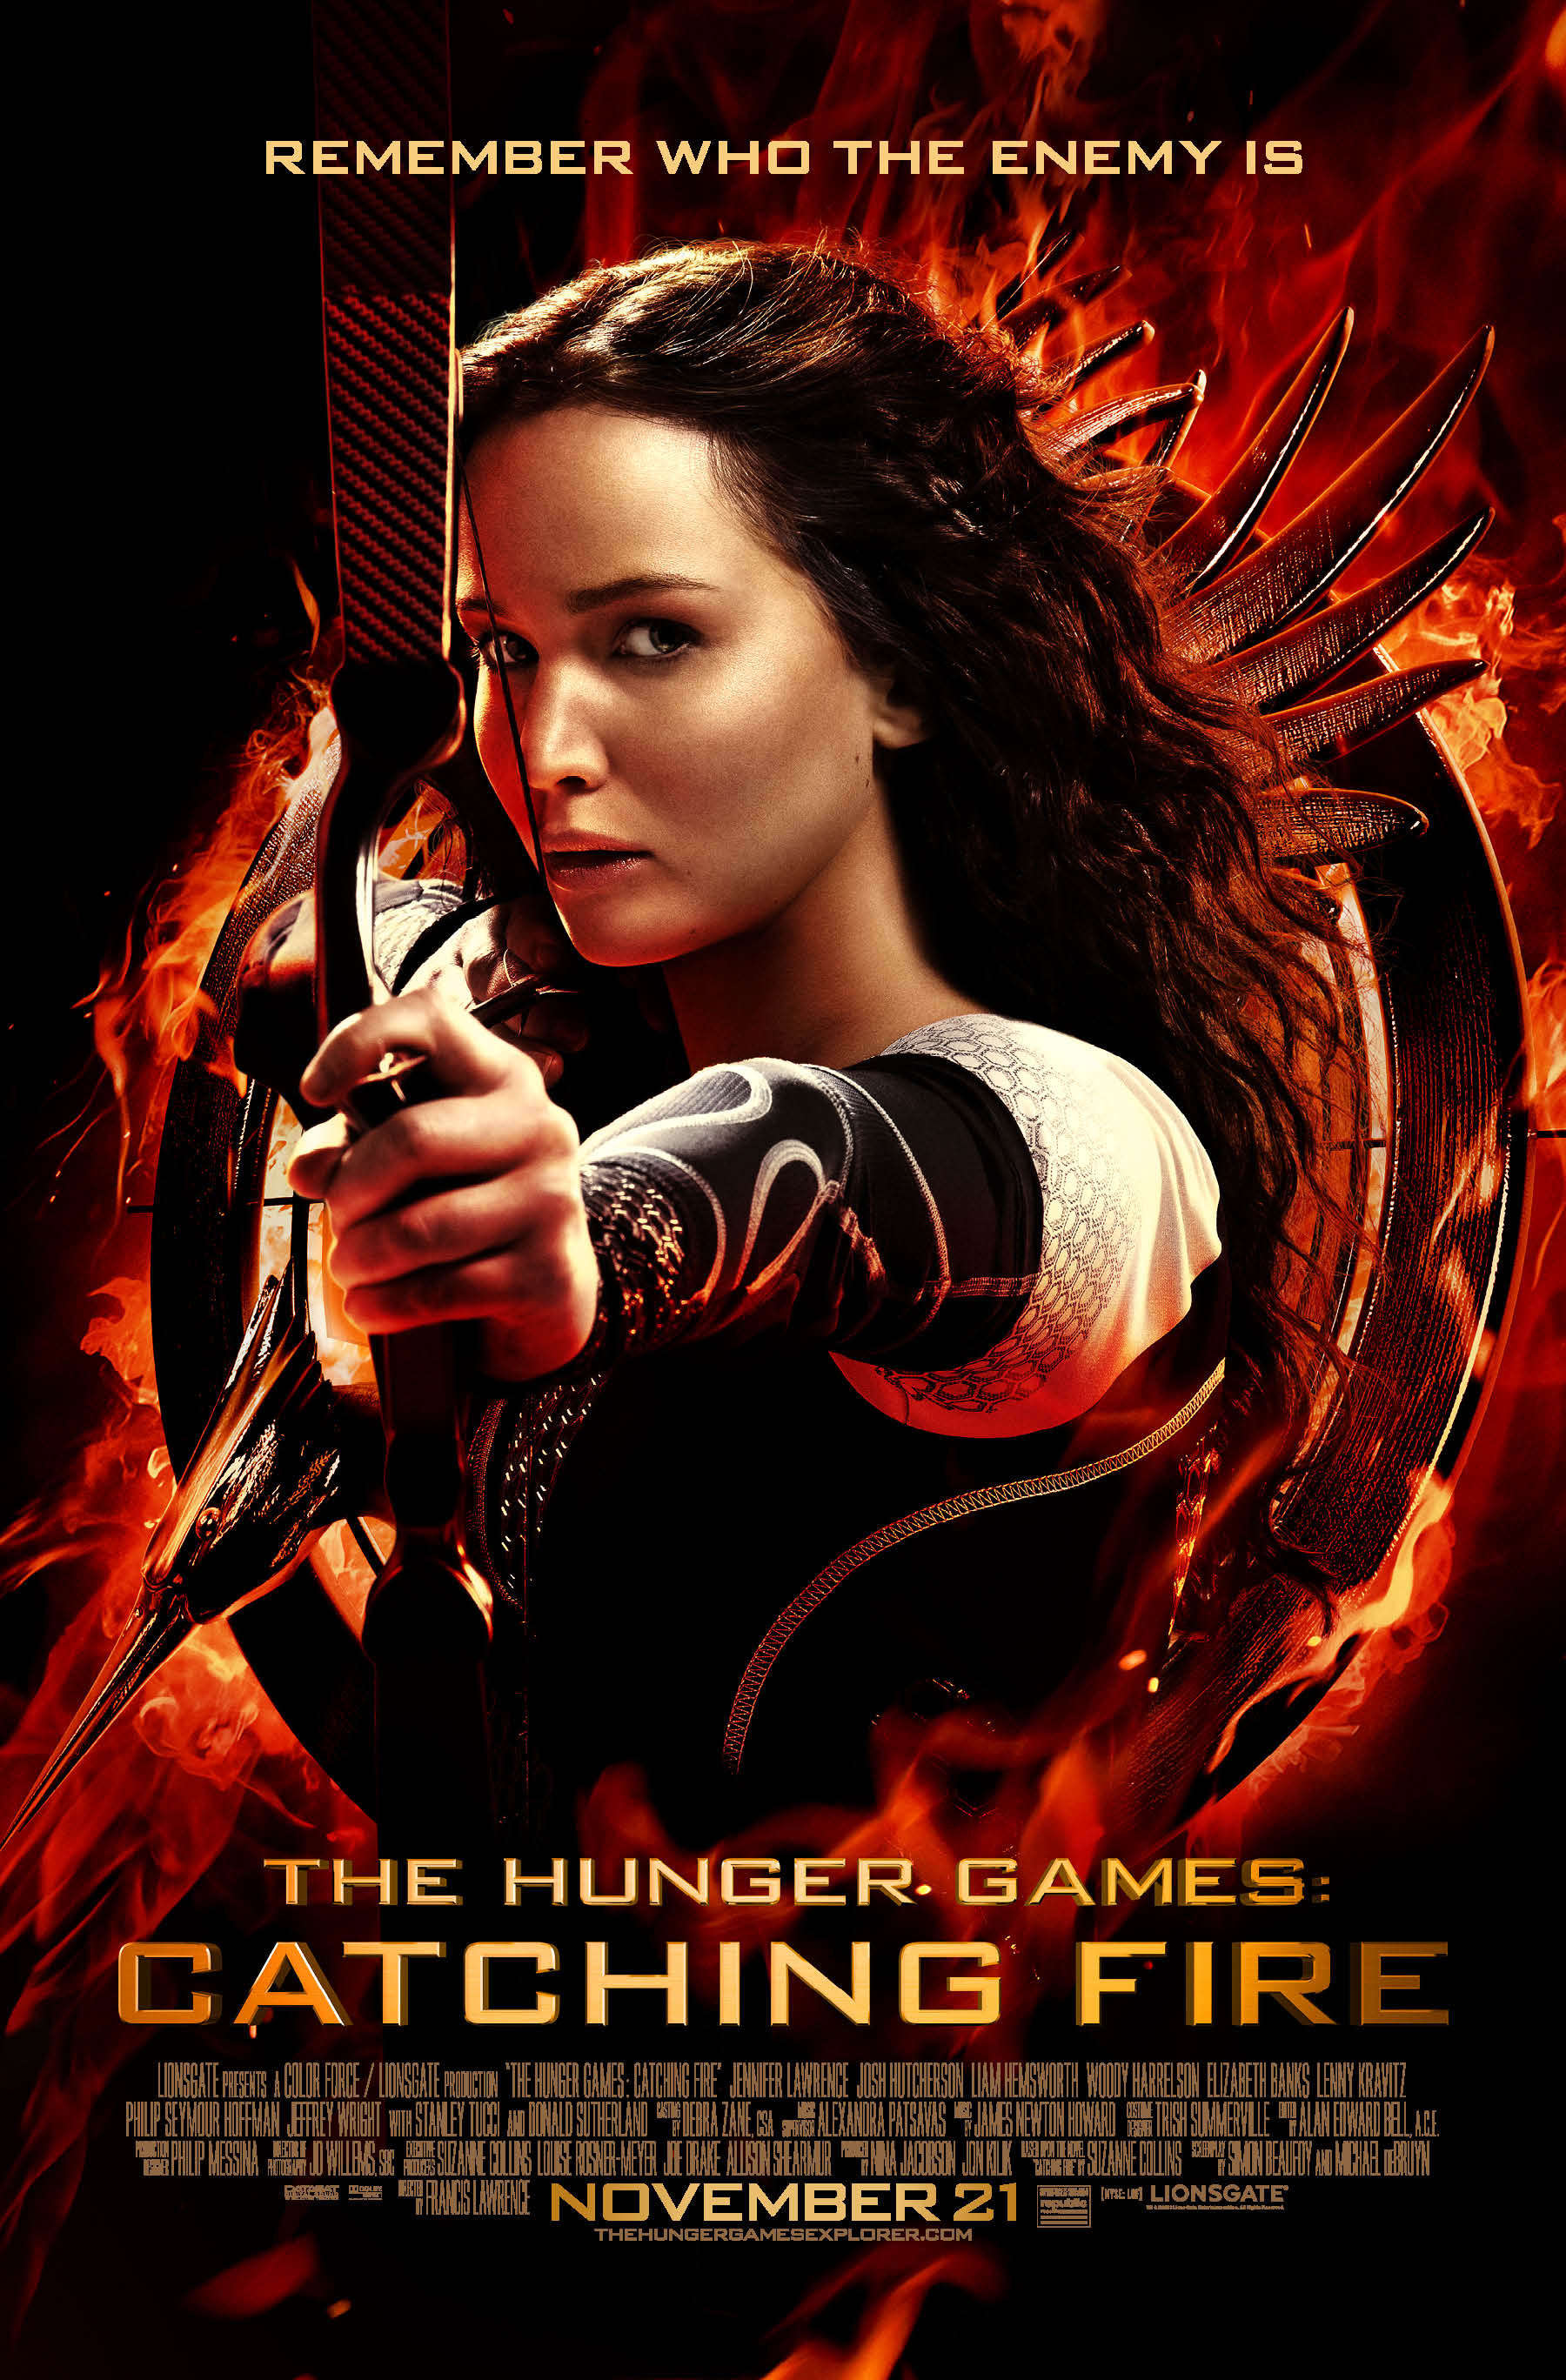 The Hunger Games: Catching Fire - Movie Review